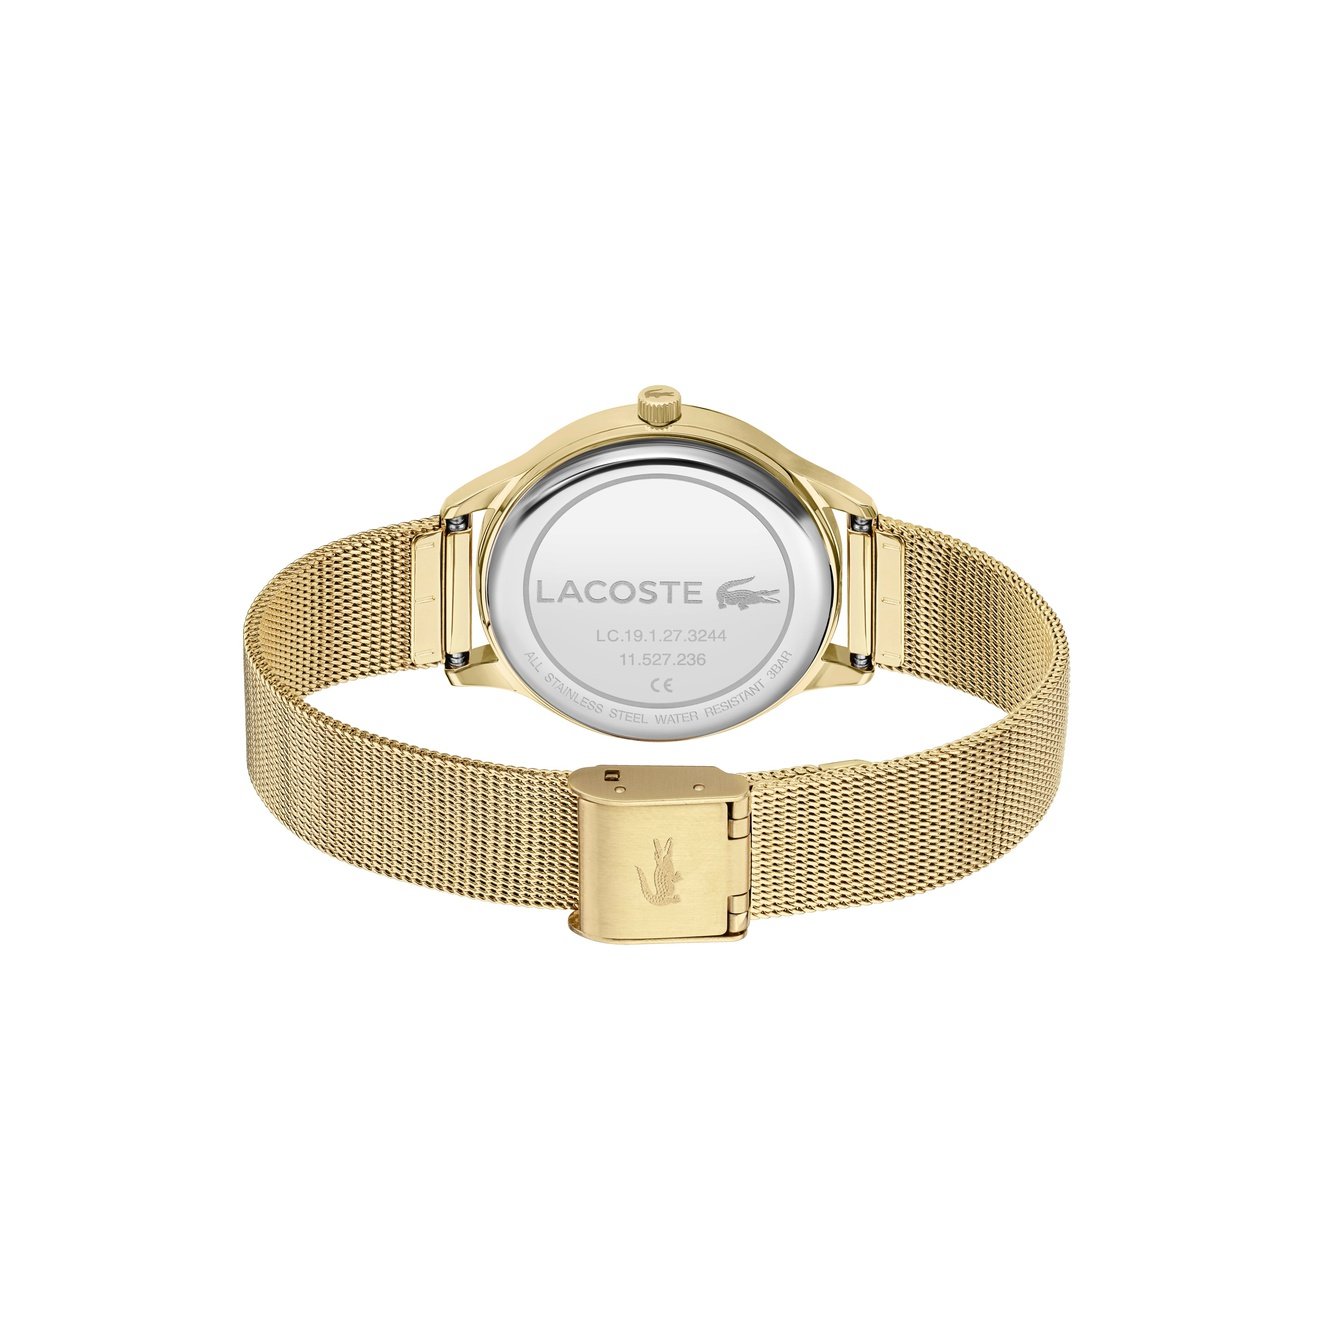 Ladies Lacoste Club Watch 2001255 Lacoste